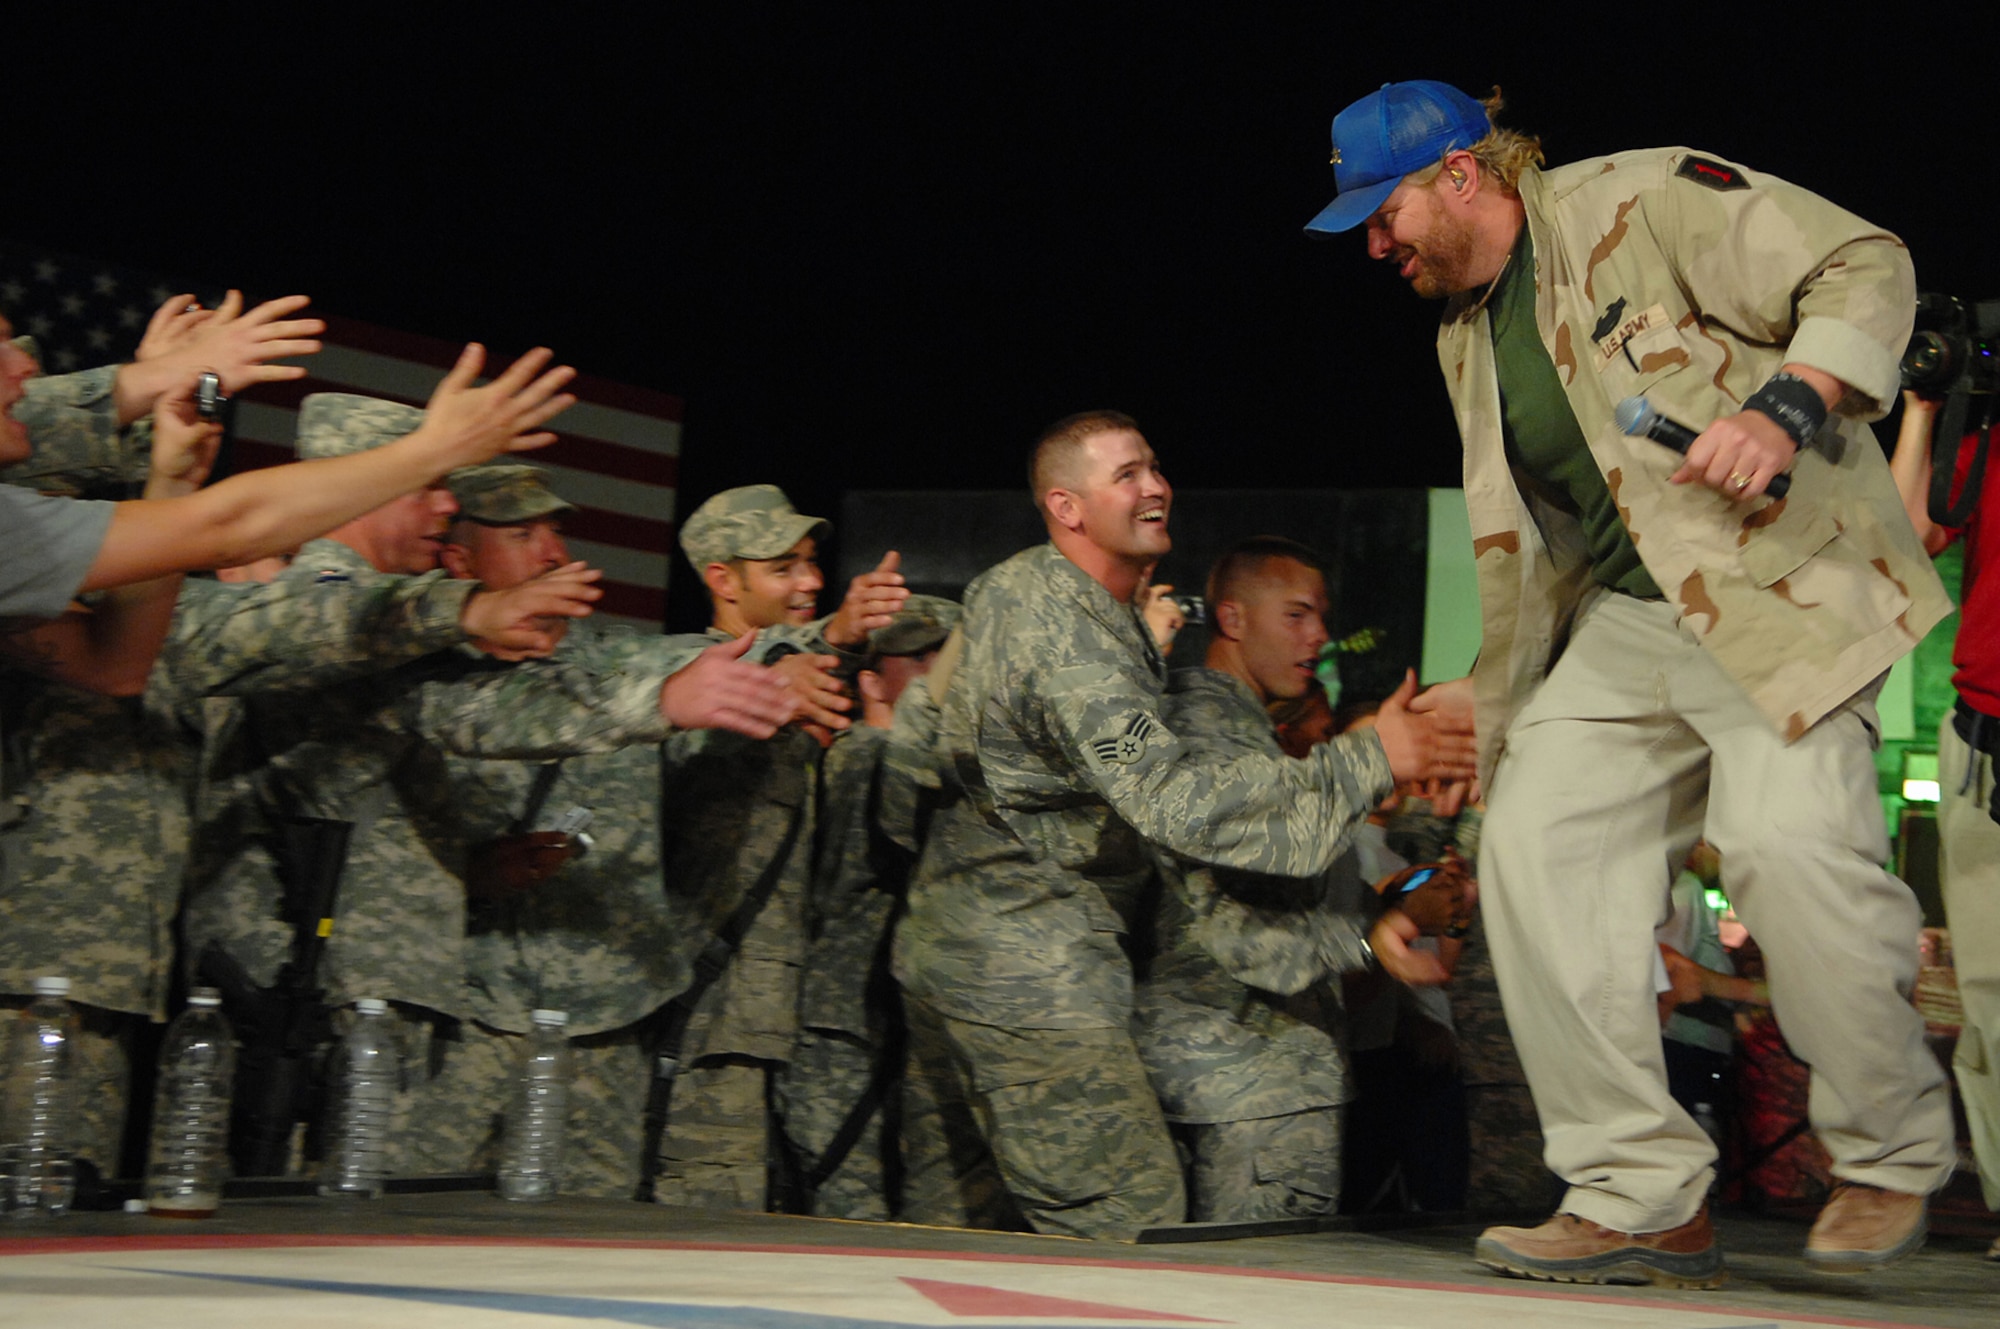 BALAD AIR BASE, Iraq -- Toby Keith grabs the outstretched hand of Senior Airman Brent Contratto, 332nd Expeditionary Security Forces Squadron force protection Airman, during a concert for servicemembers here, April 28. Mr. Keith told those in attendance that he was proud of their service and thankful for their efforts in fighting terrorists and keeping America free. He referred to military members as "warriors" and was present for the re-enlistments of five Soldiers stationed at Logistics Support Agency Anaconda, which is co-located with Balad. Mr. Keith is wrapping up his sixth USO tour in Iraq; his show at Balad marked his 117th show in the Area of Responsibility. (U.S. Air Force photo/ Senior Airman Julianne Showalter)